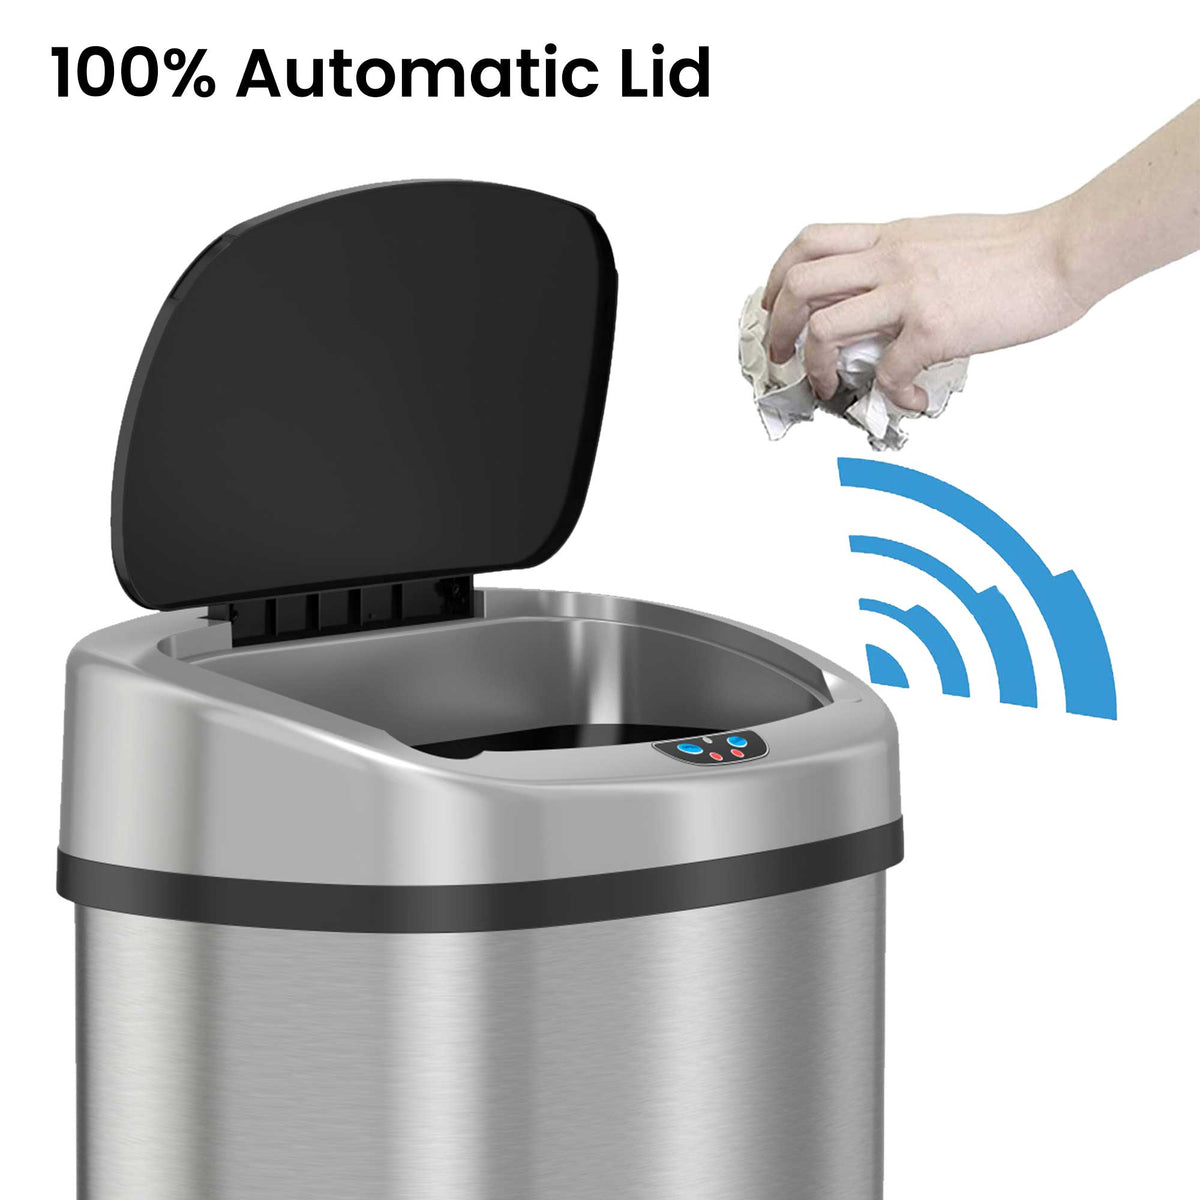 iTouchless 13 Gallon Oval Sensor Trash Can with Odor Filter 100% Automatic Ldi